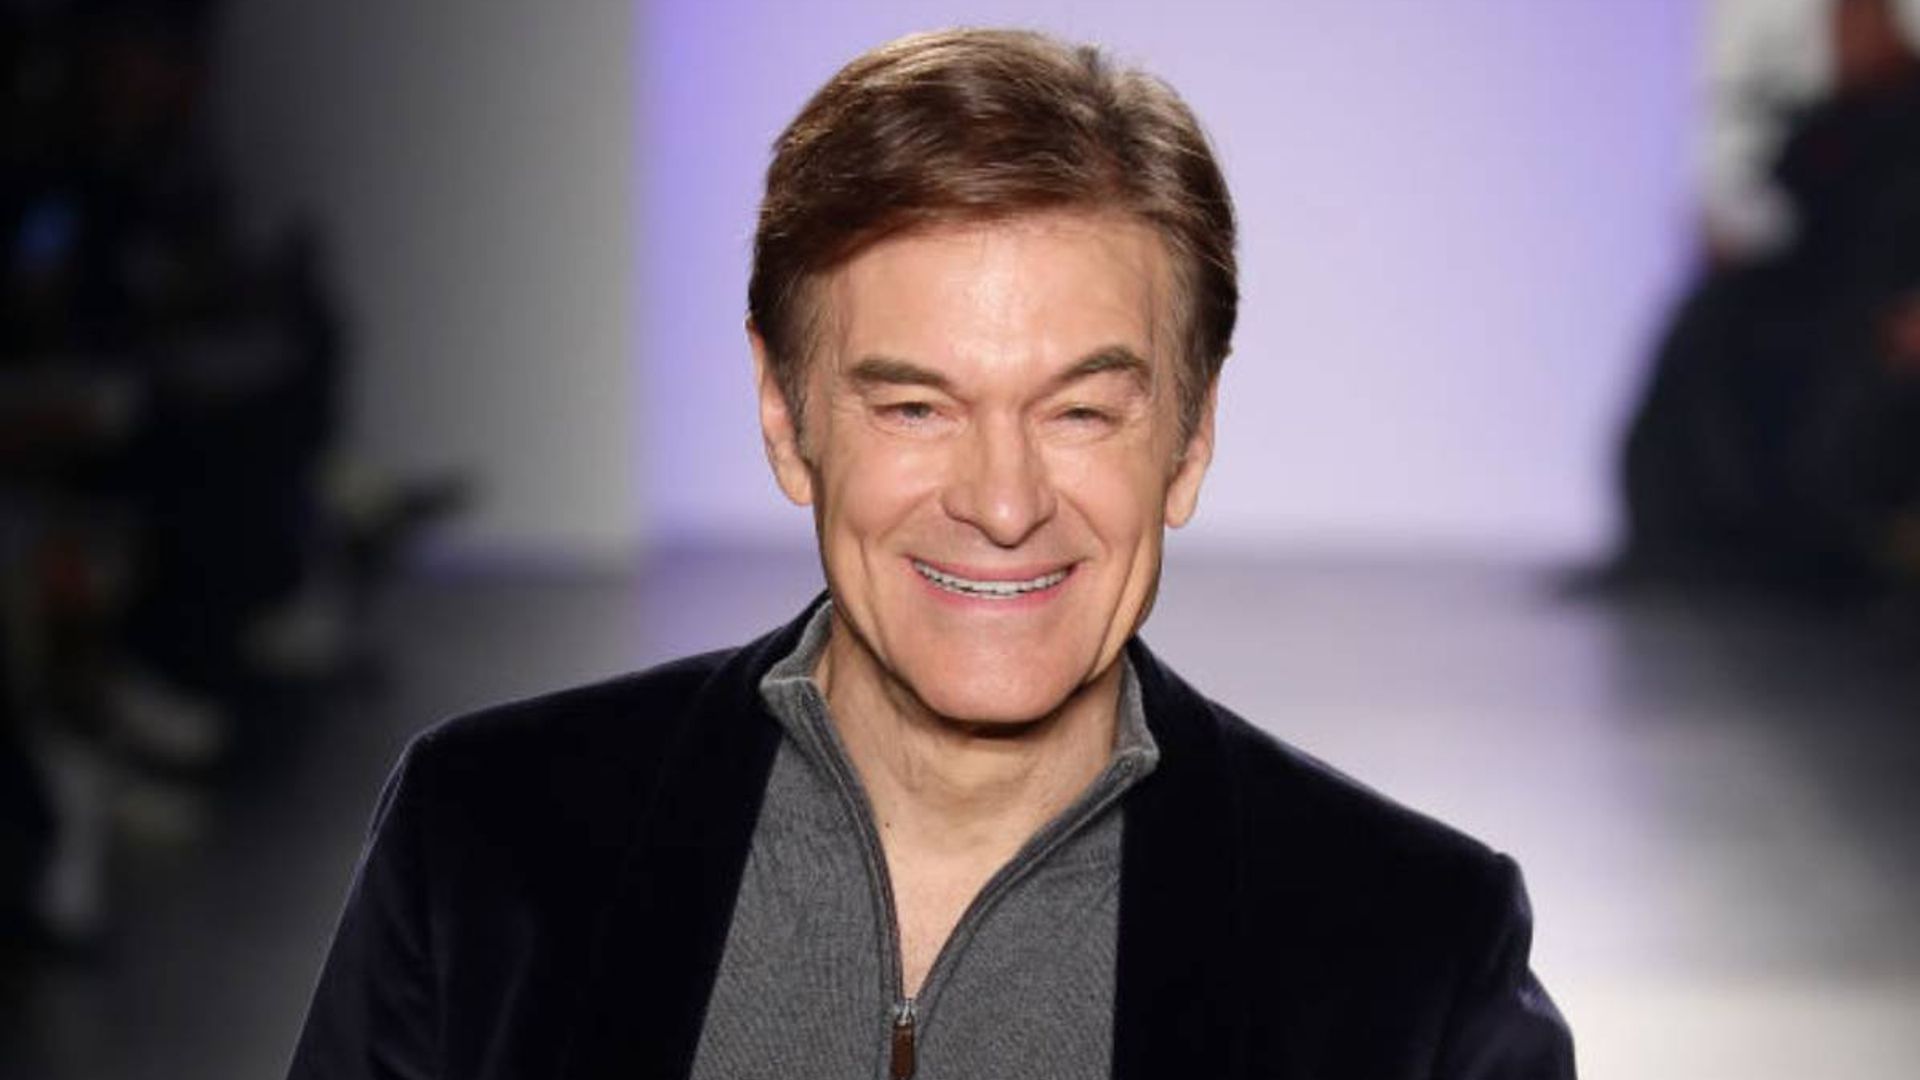 Dr. Oz's Blue Hair: How to Achieve the Look at Home - wide 2